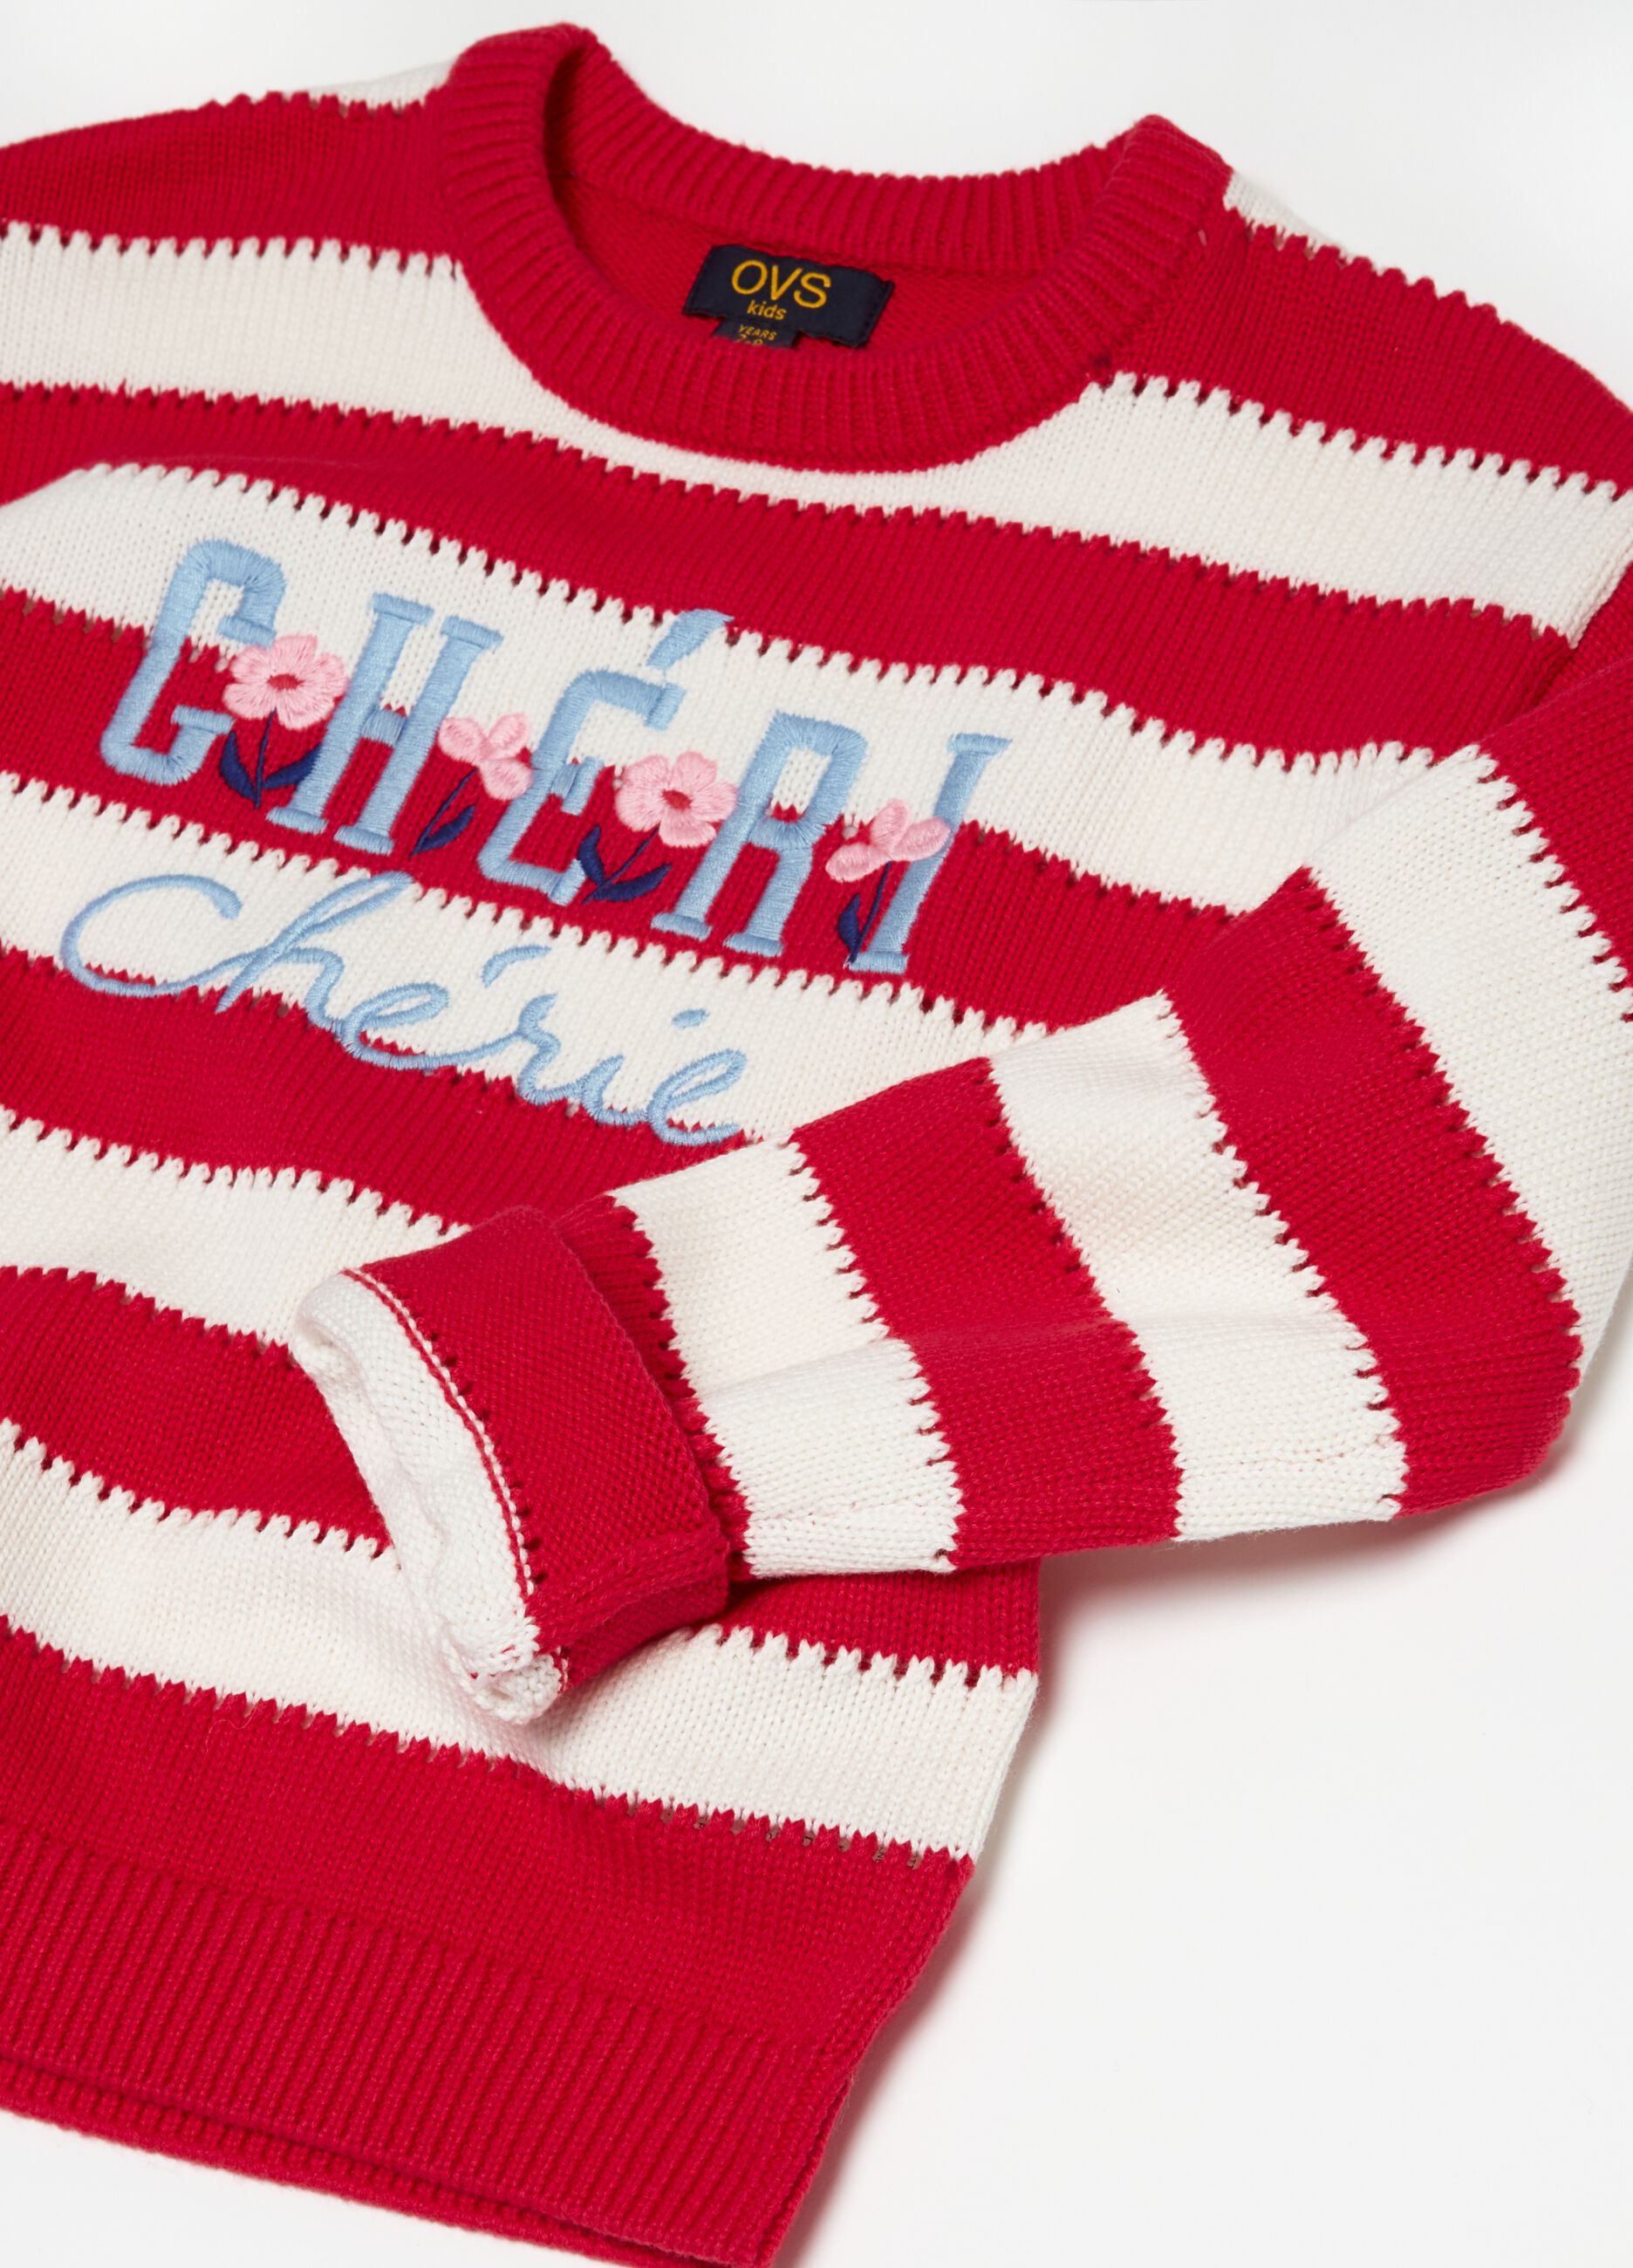 Striped pullover with embroidered lettering